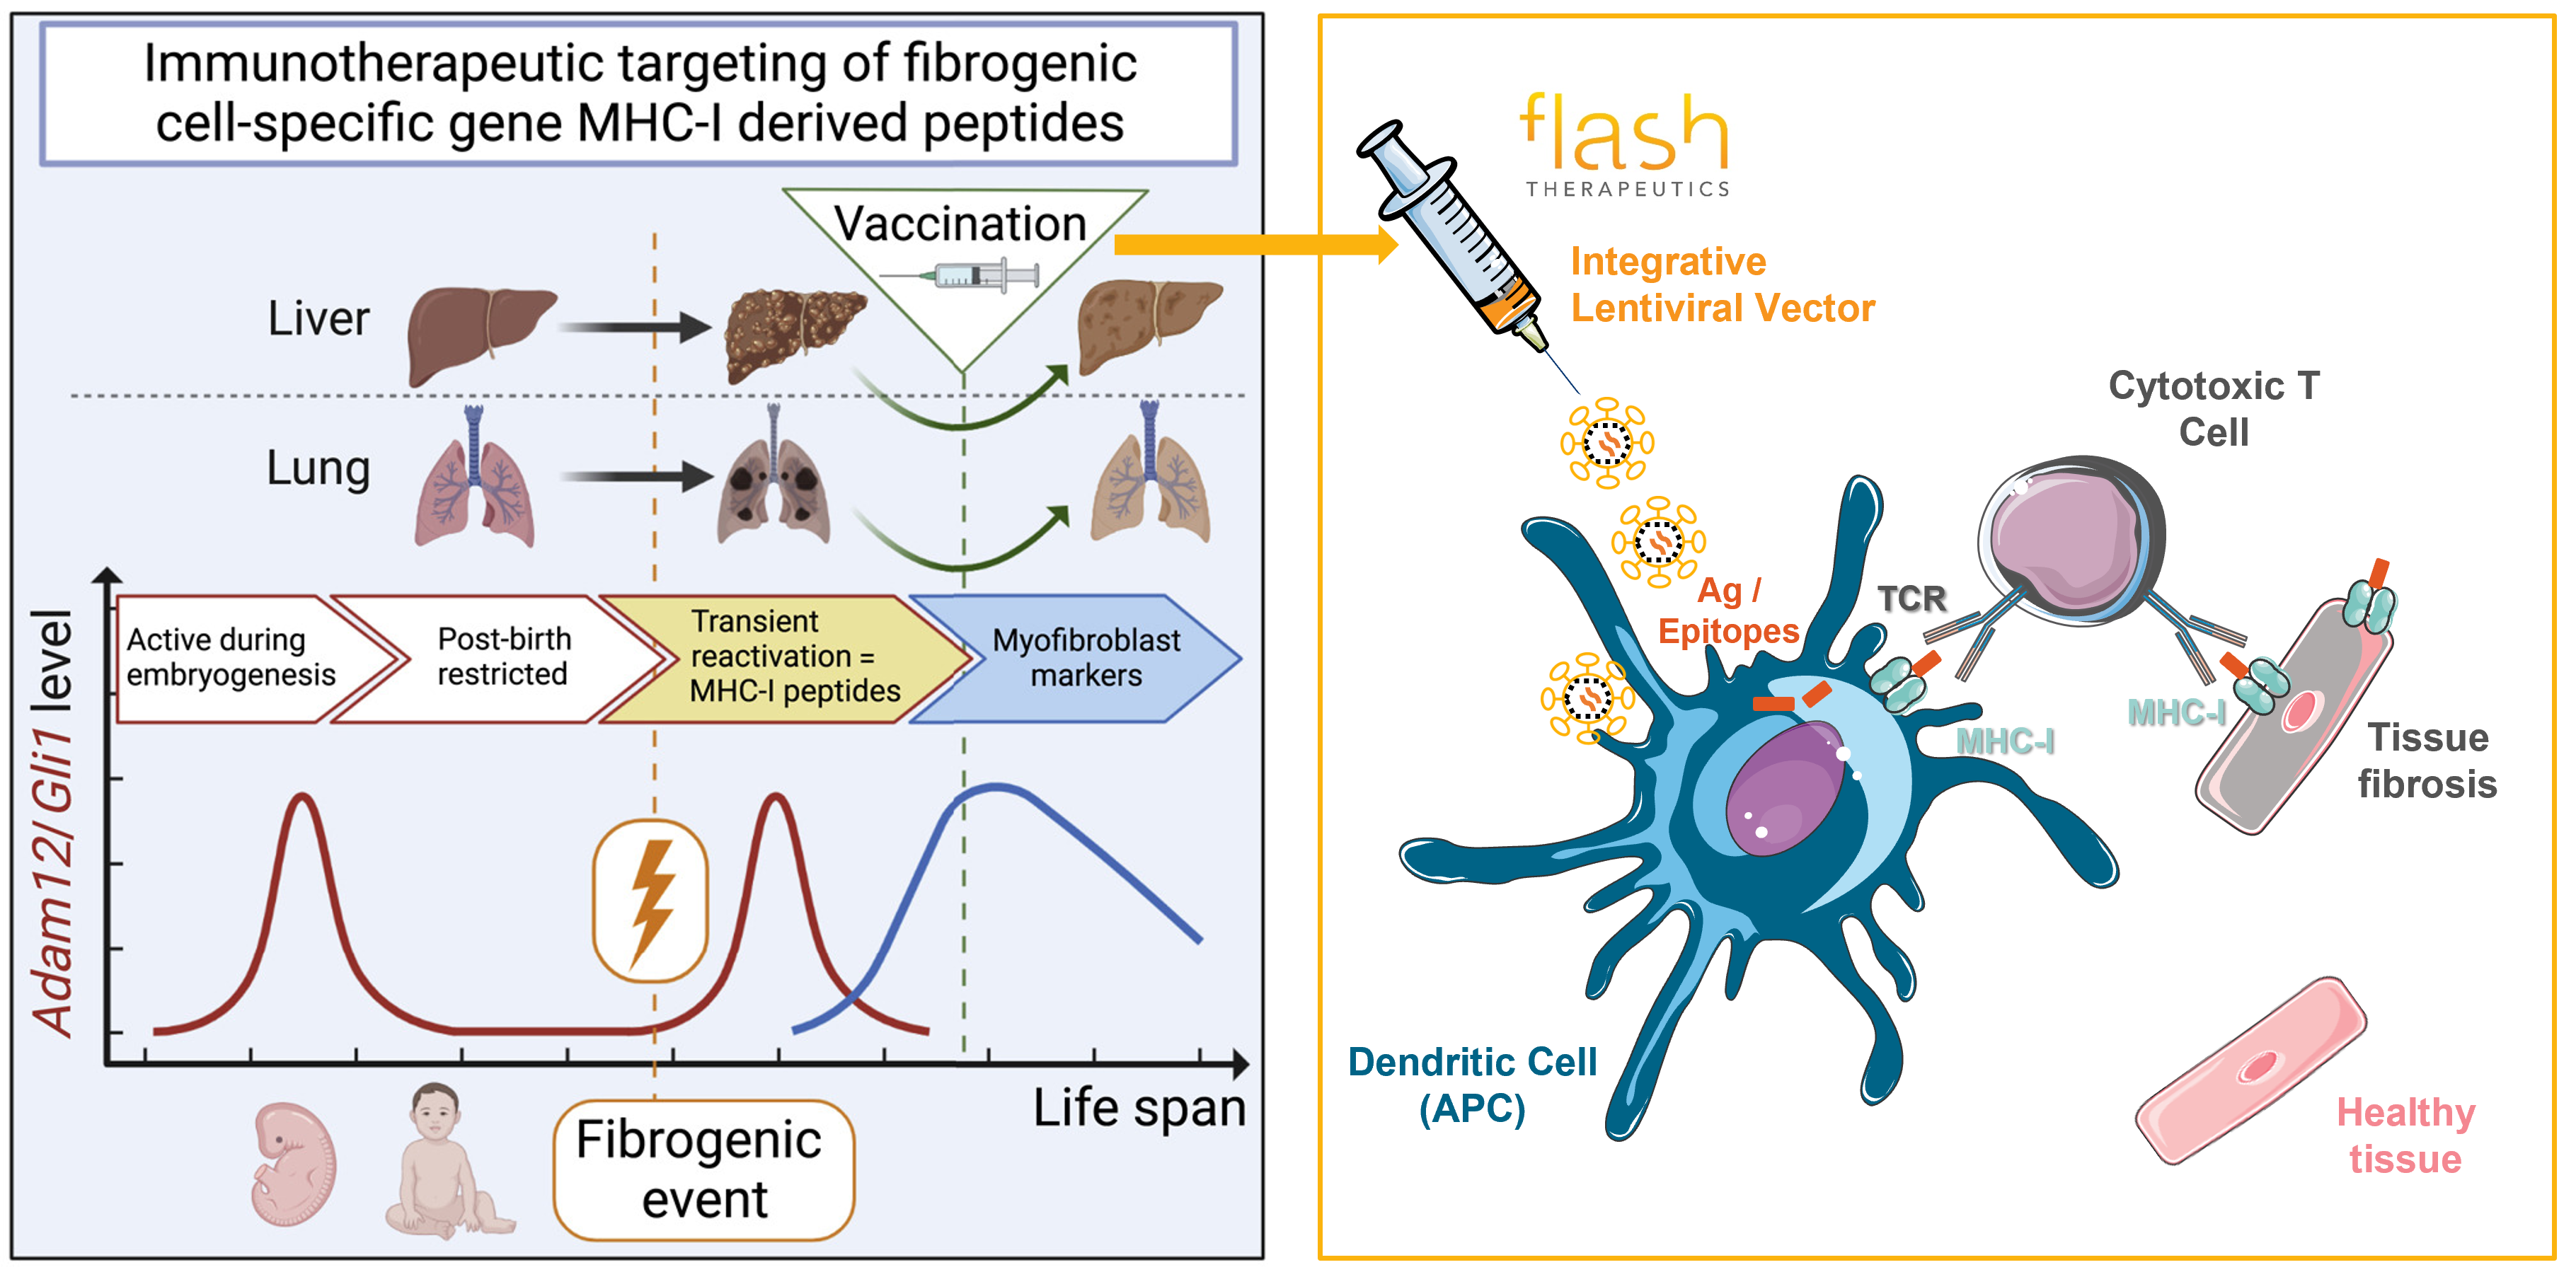 r363_9_immunotherapy-fibrosis-liver-lung-flashtherapeutics-viral-vectors.png